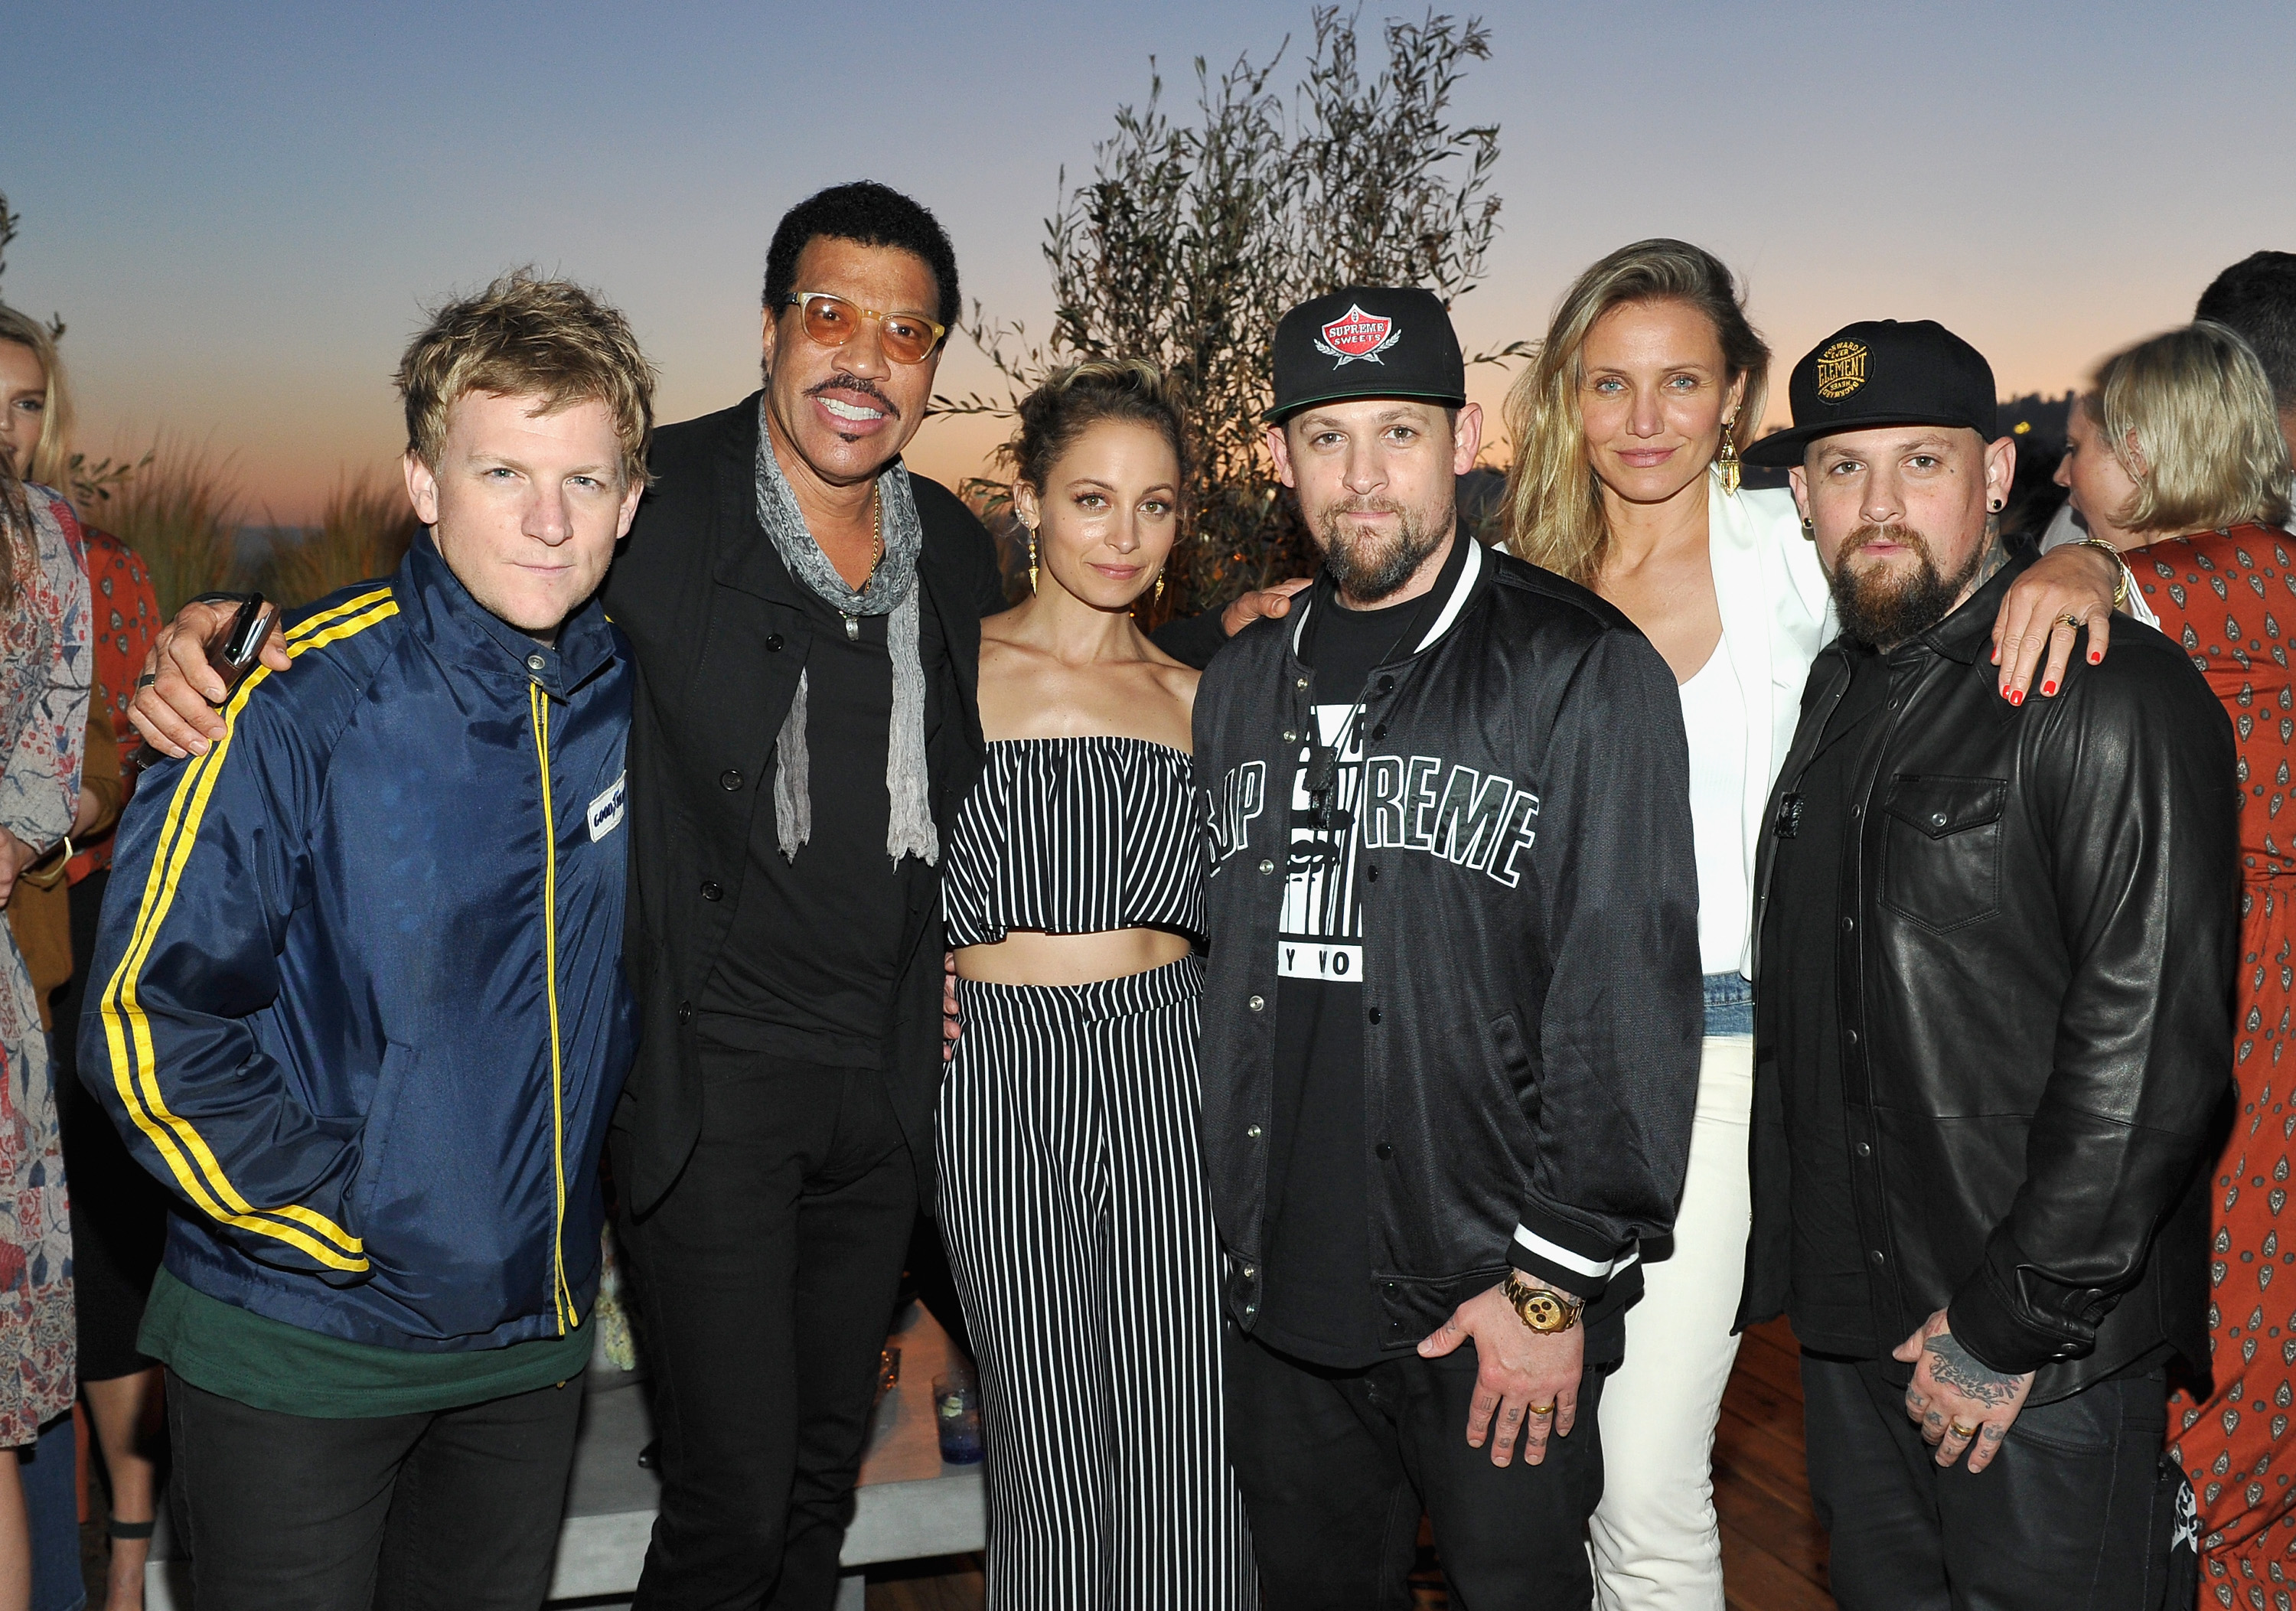 (L-R) Josh Madden, Lionel Richie, Nicole Richie, Joel Madden, Cameron Diaz and Benji Madden attend House of Harlow 1960 x Revolve on June 2, 2016 in Los Angeles, California. | Source: Getty Images